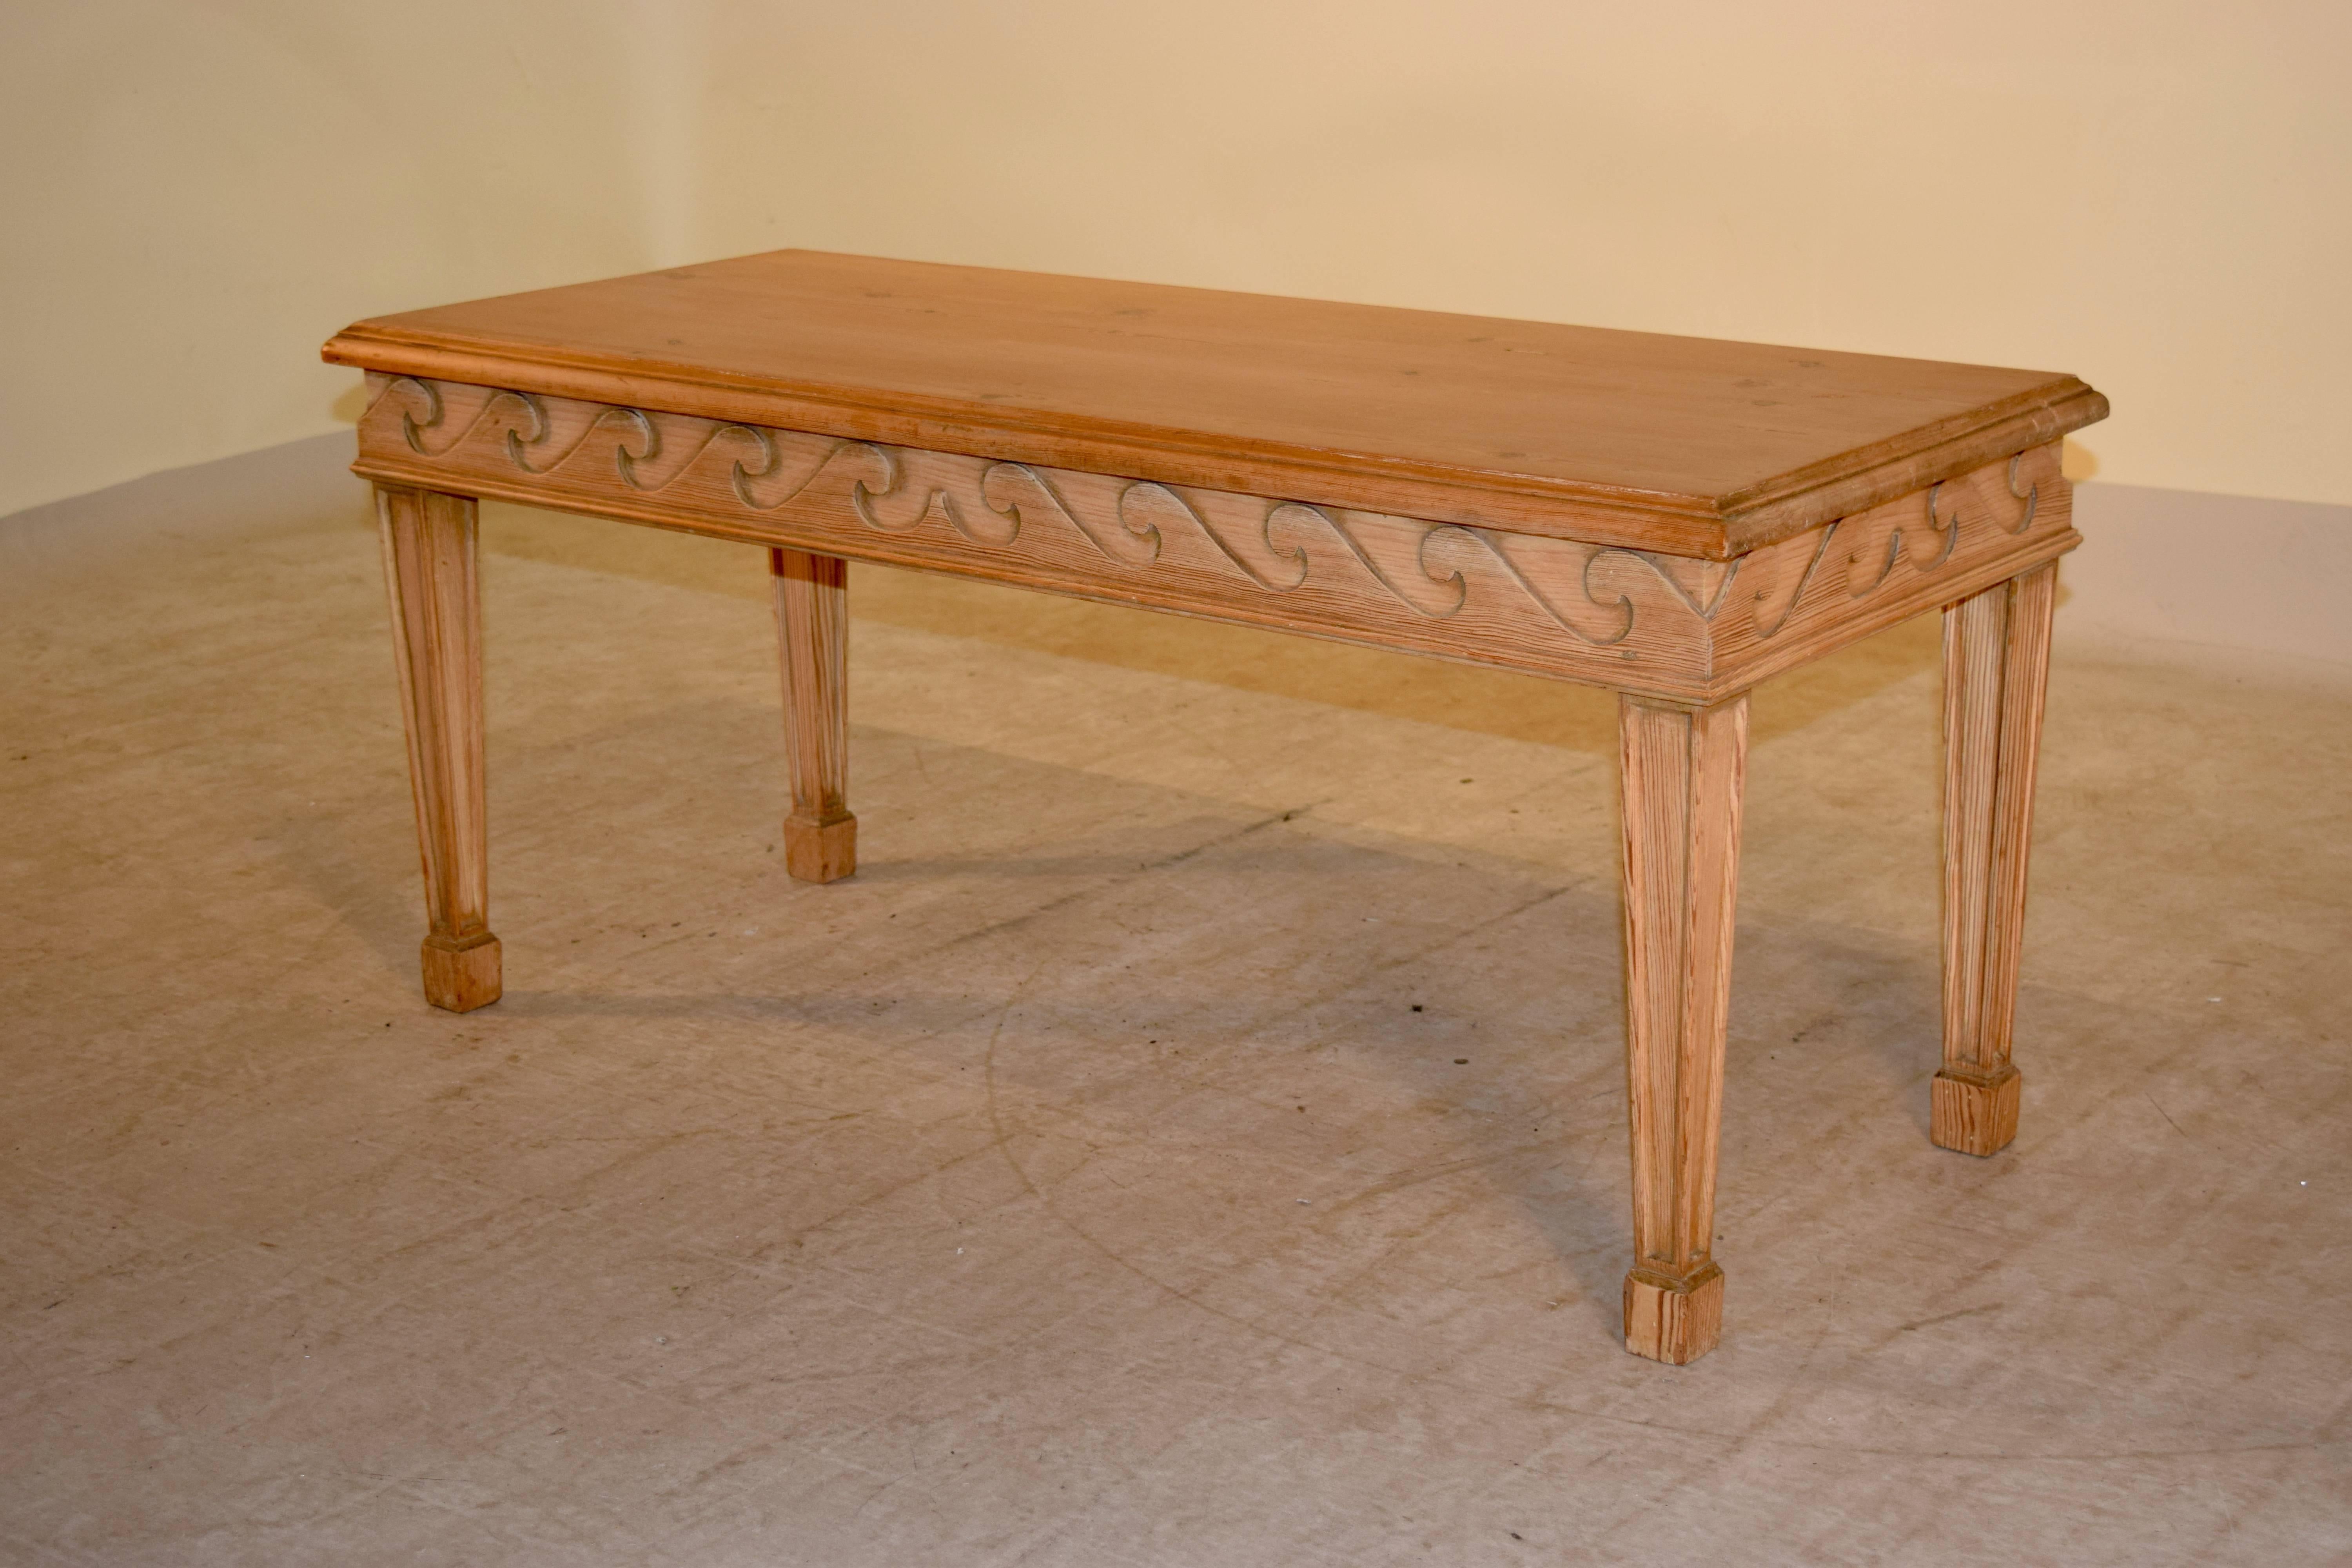 Late 19th century French cocktail table made from pitch pine. The top has two small repairs and has a beveled edge, following down to a swan's neck shaped carved decorated apron, supported on paneled tapered legs, ending in blocked feet.